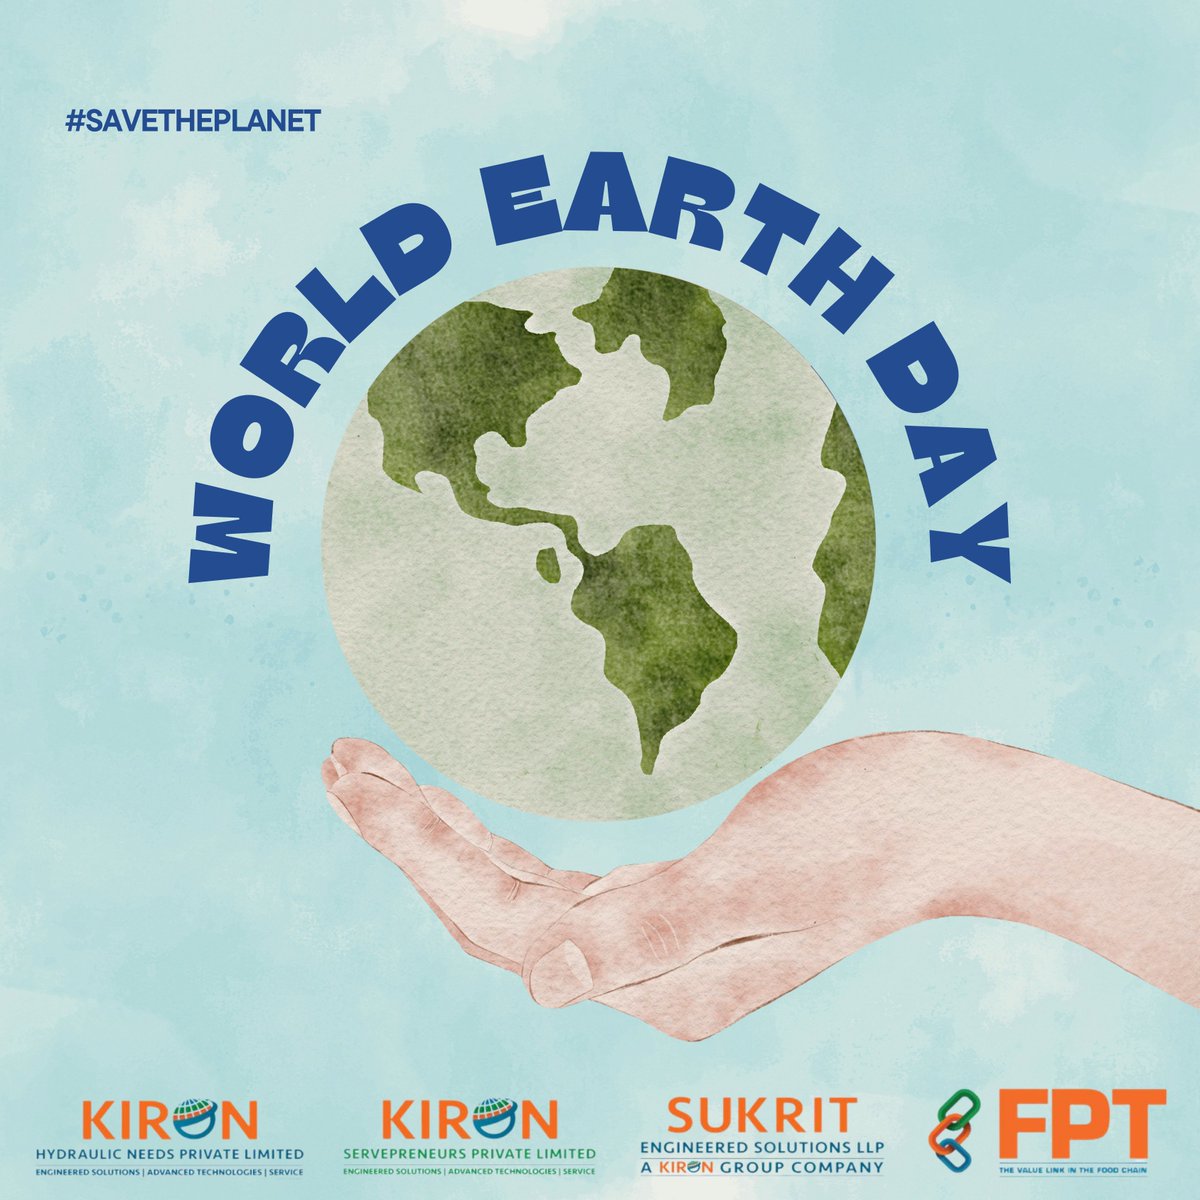 Happy Earth Day! At Kiron Food Processing Technologies, we understand the connection between healthy food and a healthy planet. Lets work together for a more sustainable future. 

Visit us at: fptindia.com 

#EarthDay #FoodSustainability #ClimateAction #Sustainability